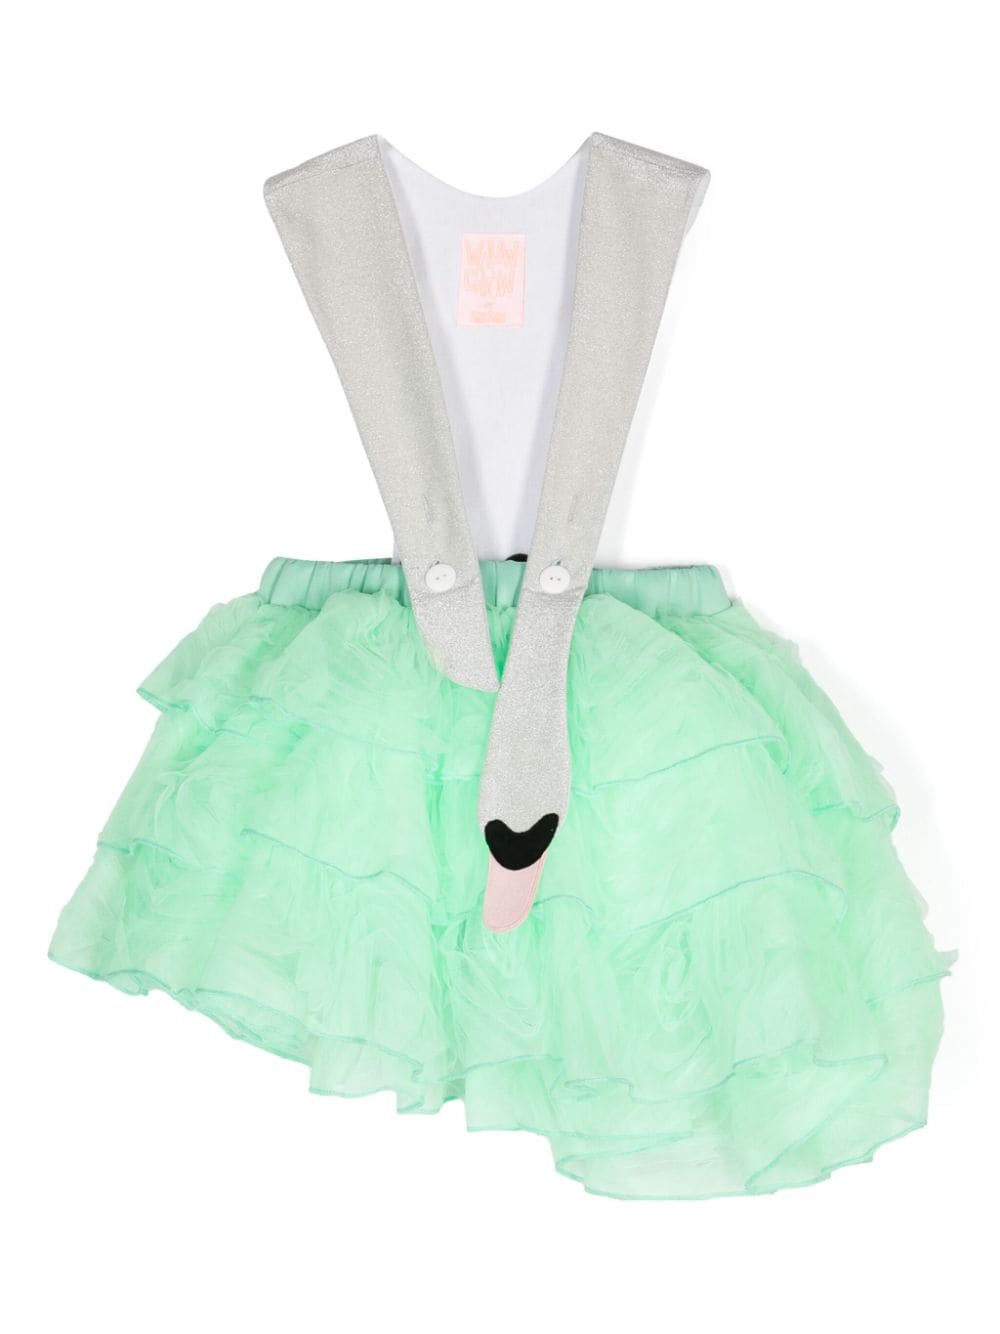 WAUW CAPOW by BANGBANG Fairytale tulle tiered dress - Green von WAUW CAPOW by BANGBANG